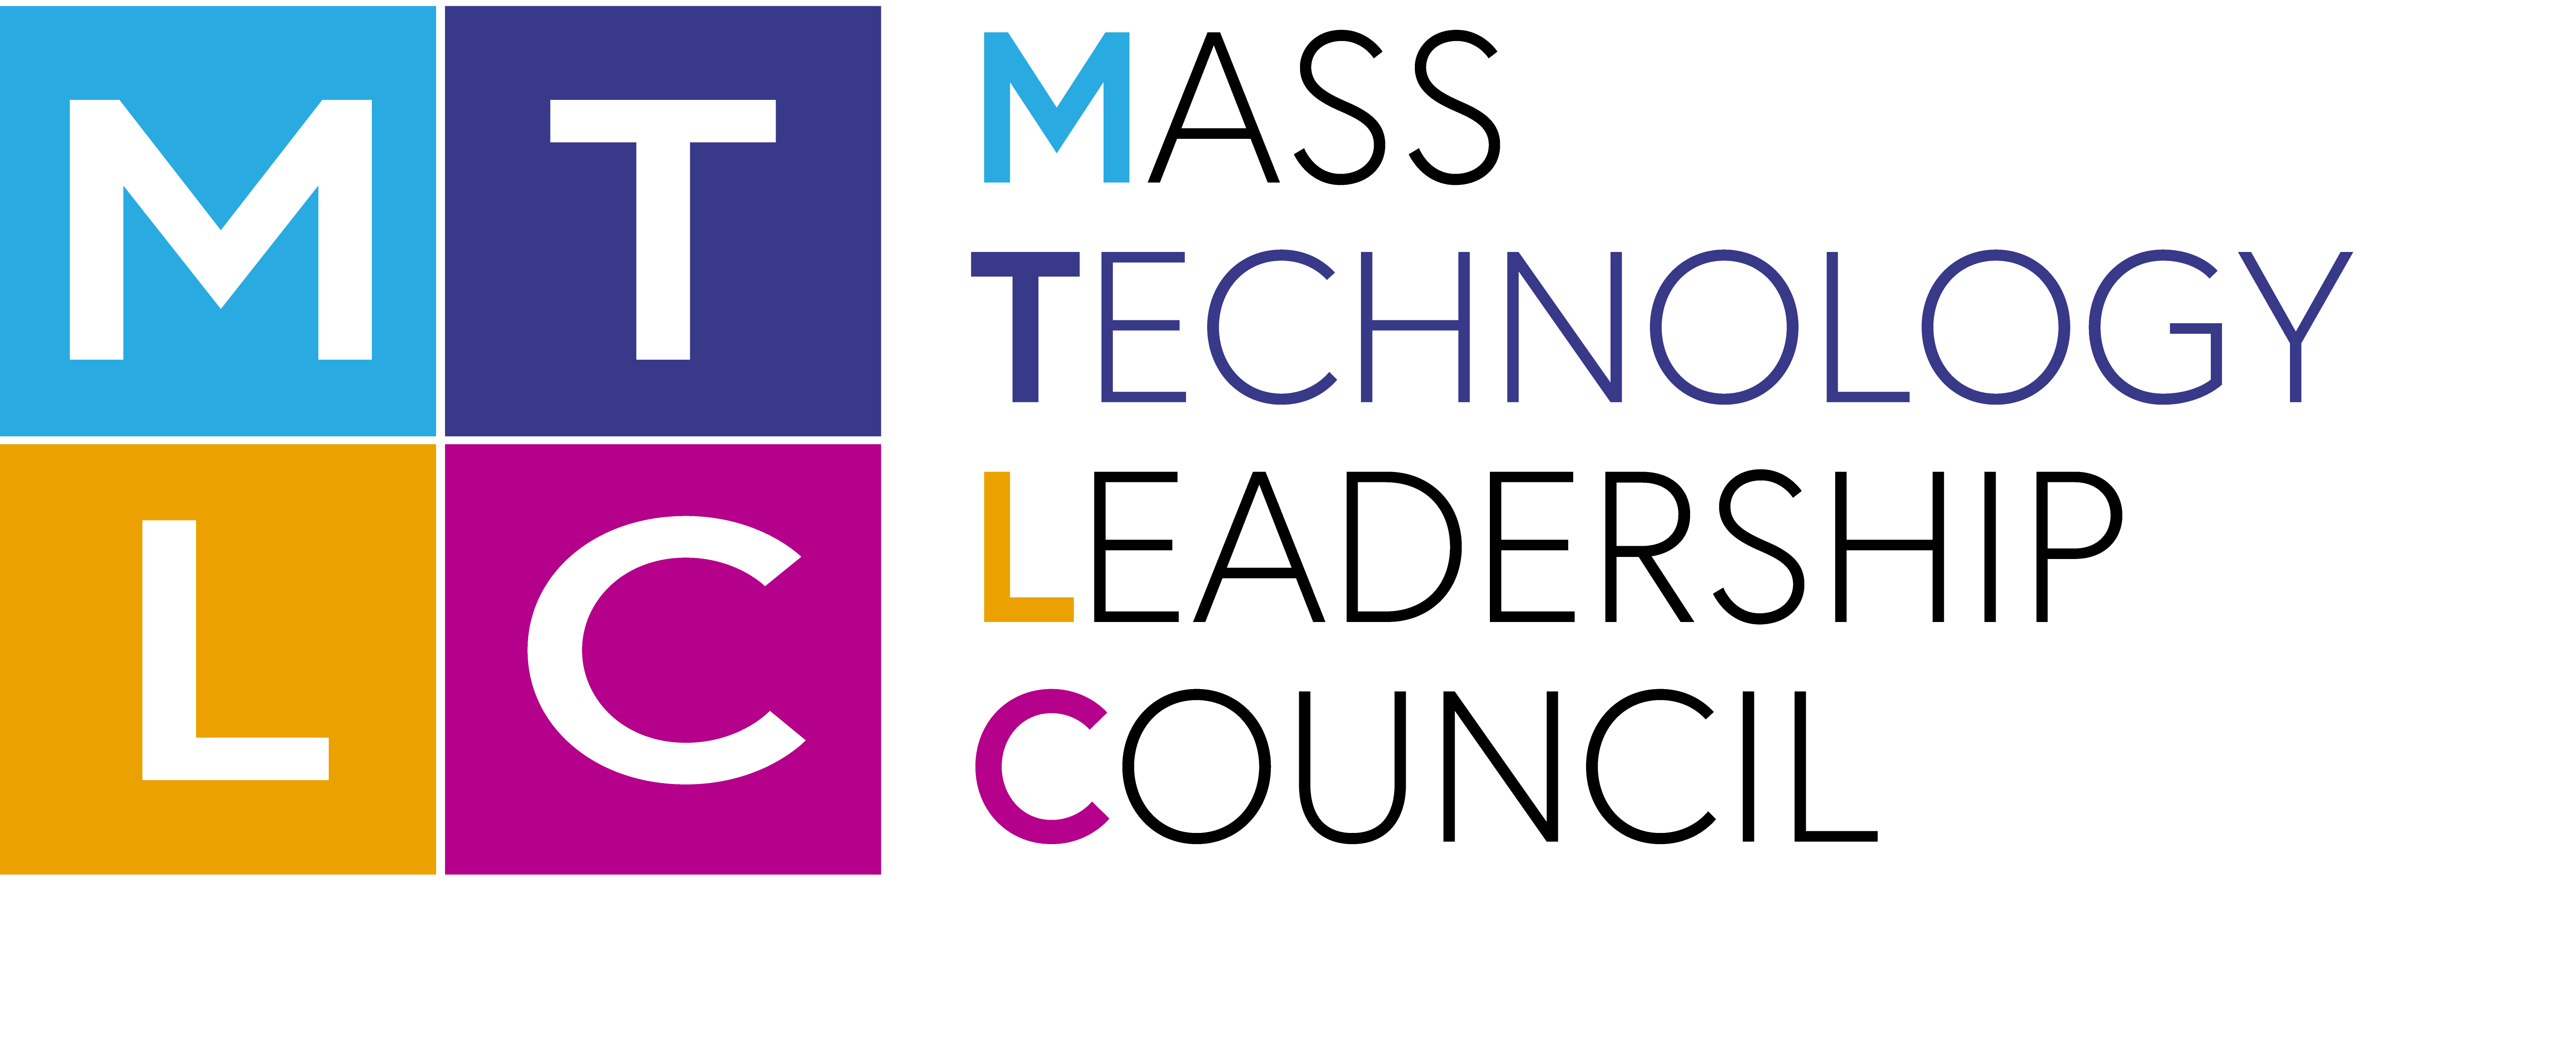 Mass Tech Leadership Council releases its State of the Massachusetts Technology Report